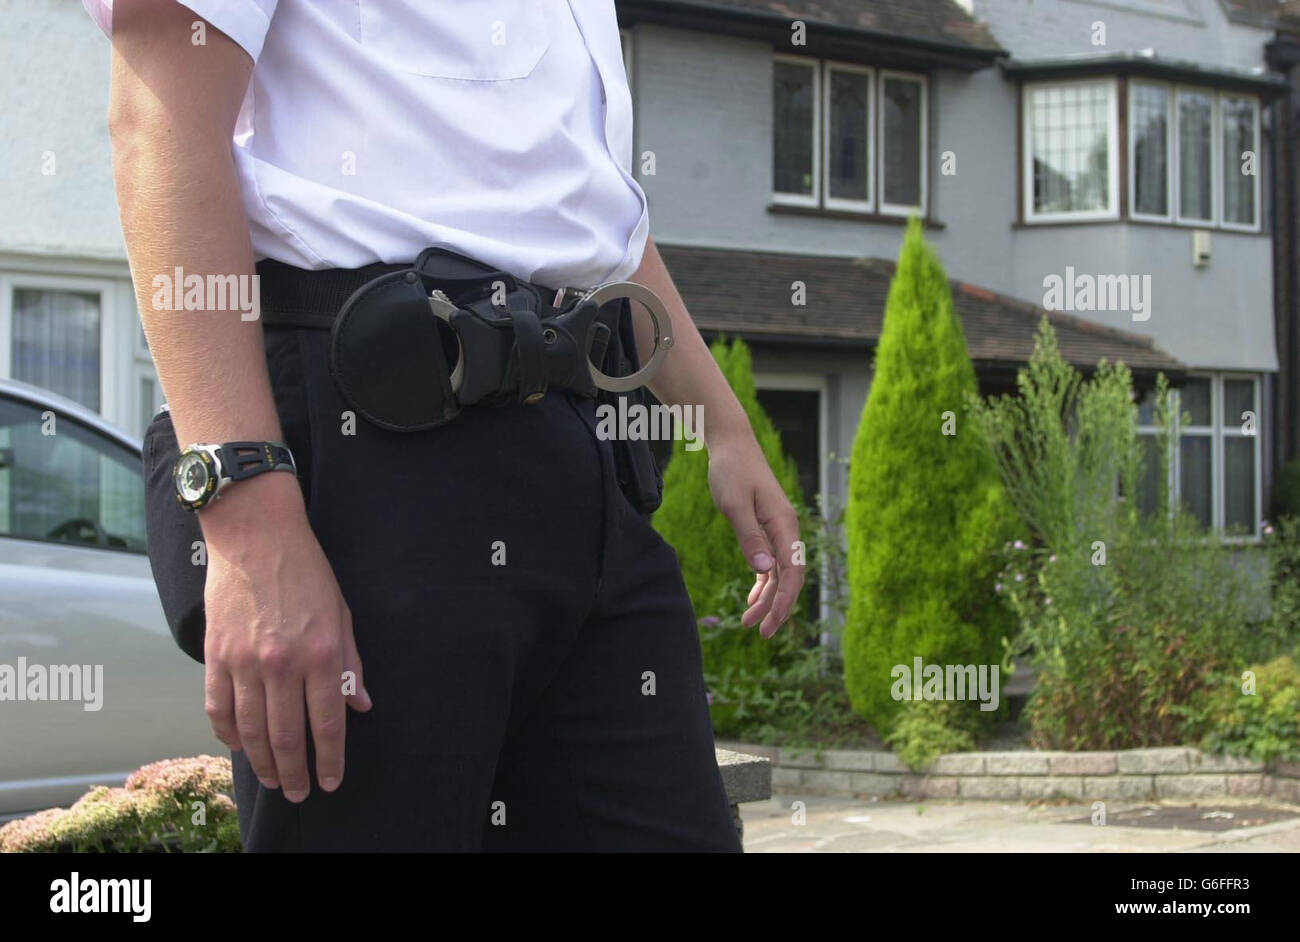 A policeman keeps guard outside a house believed to be that of Mr Lakhani, the man arrested by police in the United States of America for allegedly trying to sell a missile to terrorists, in Hendon, north-west London. * The man was arrested following an undercover operation. He is due to face charges in court in the United States. Stock Photo